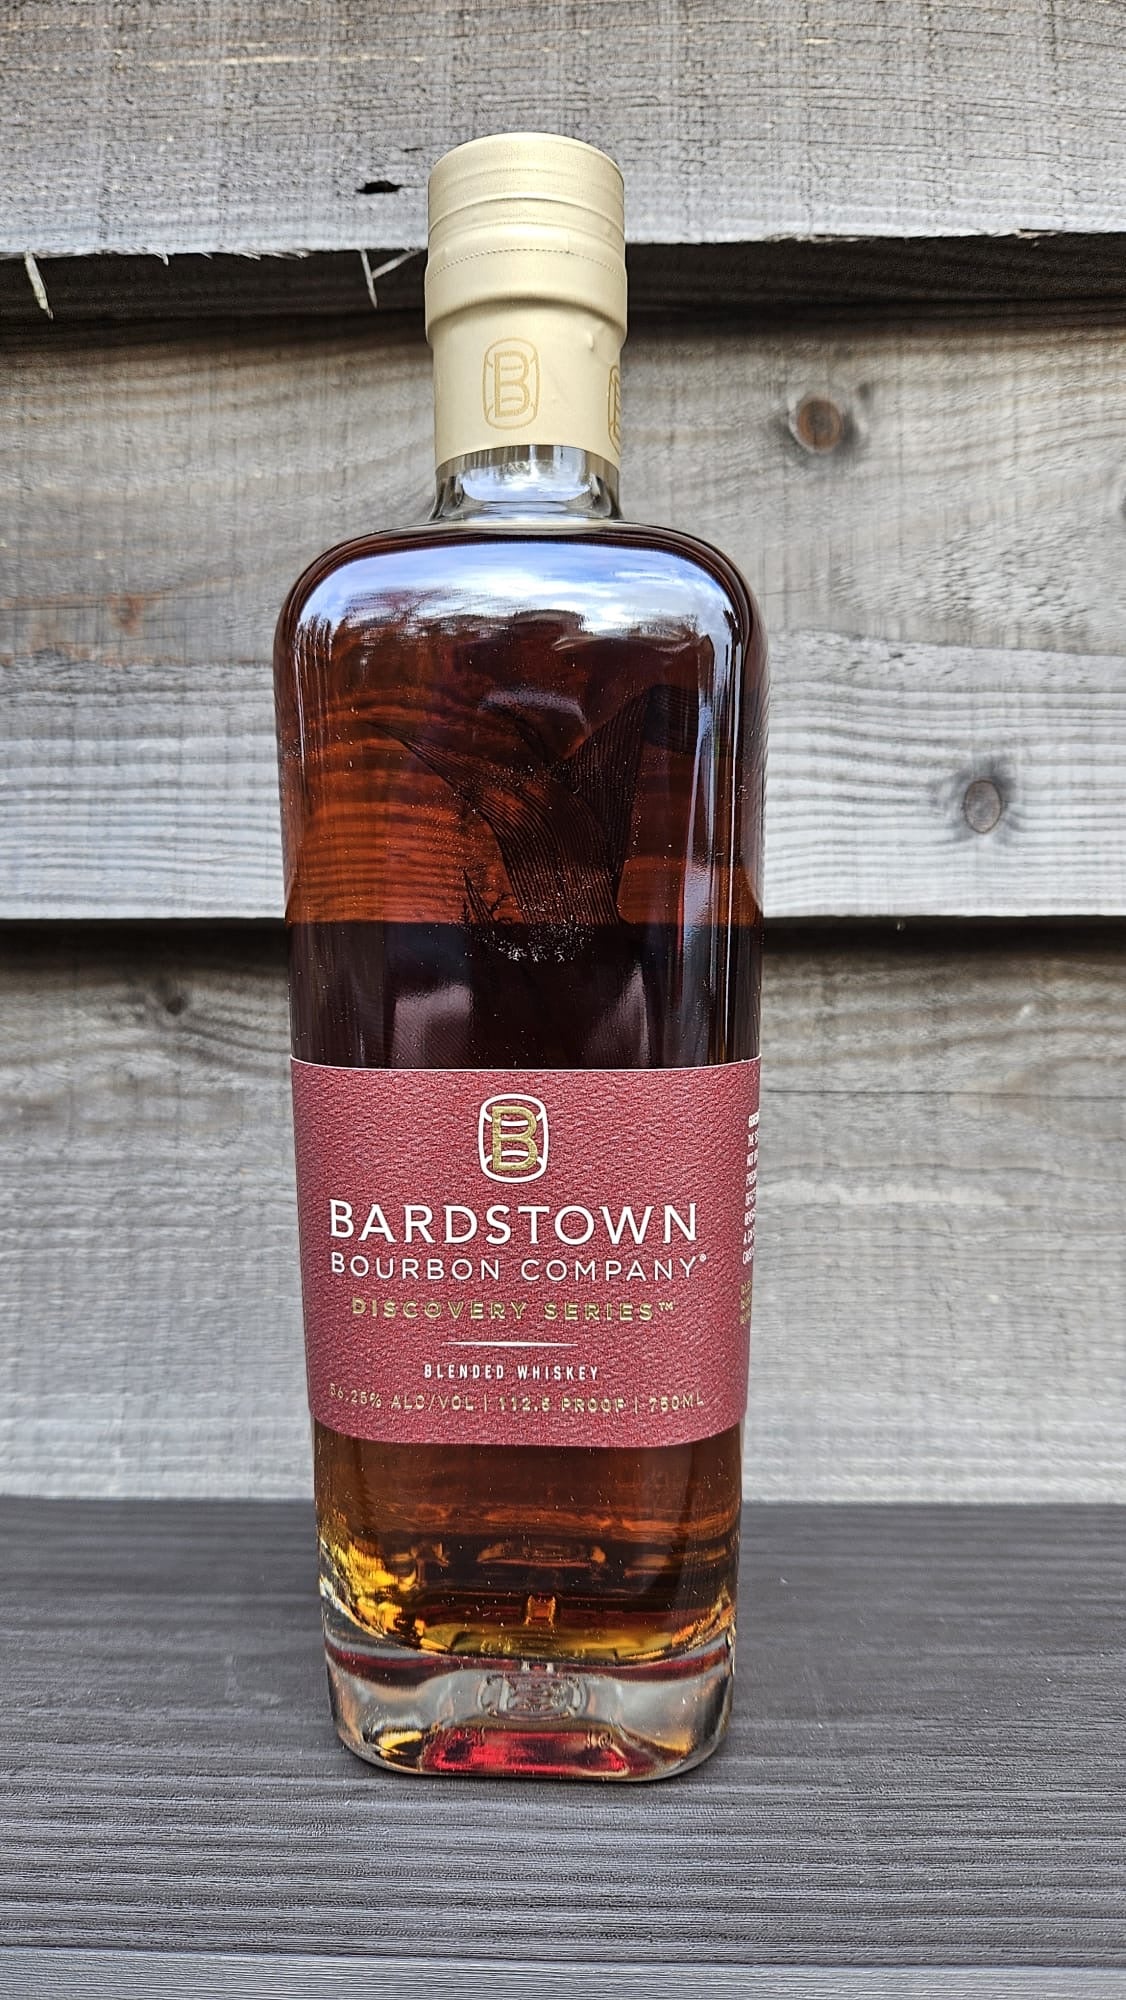 Bardstown Bourbon Company Discovery Series #9 Blended Whiskey 75cl 56.25%